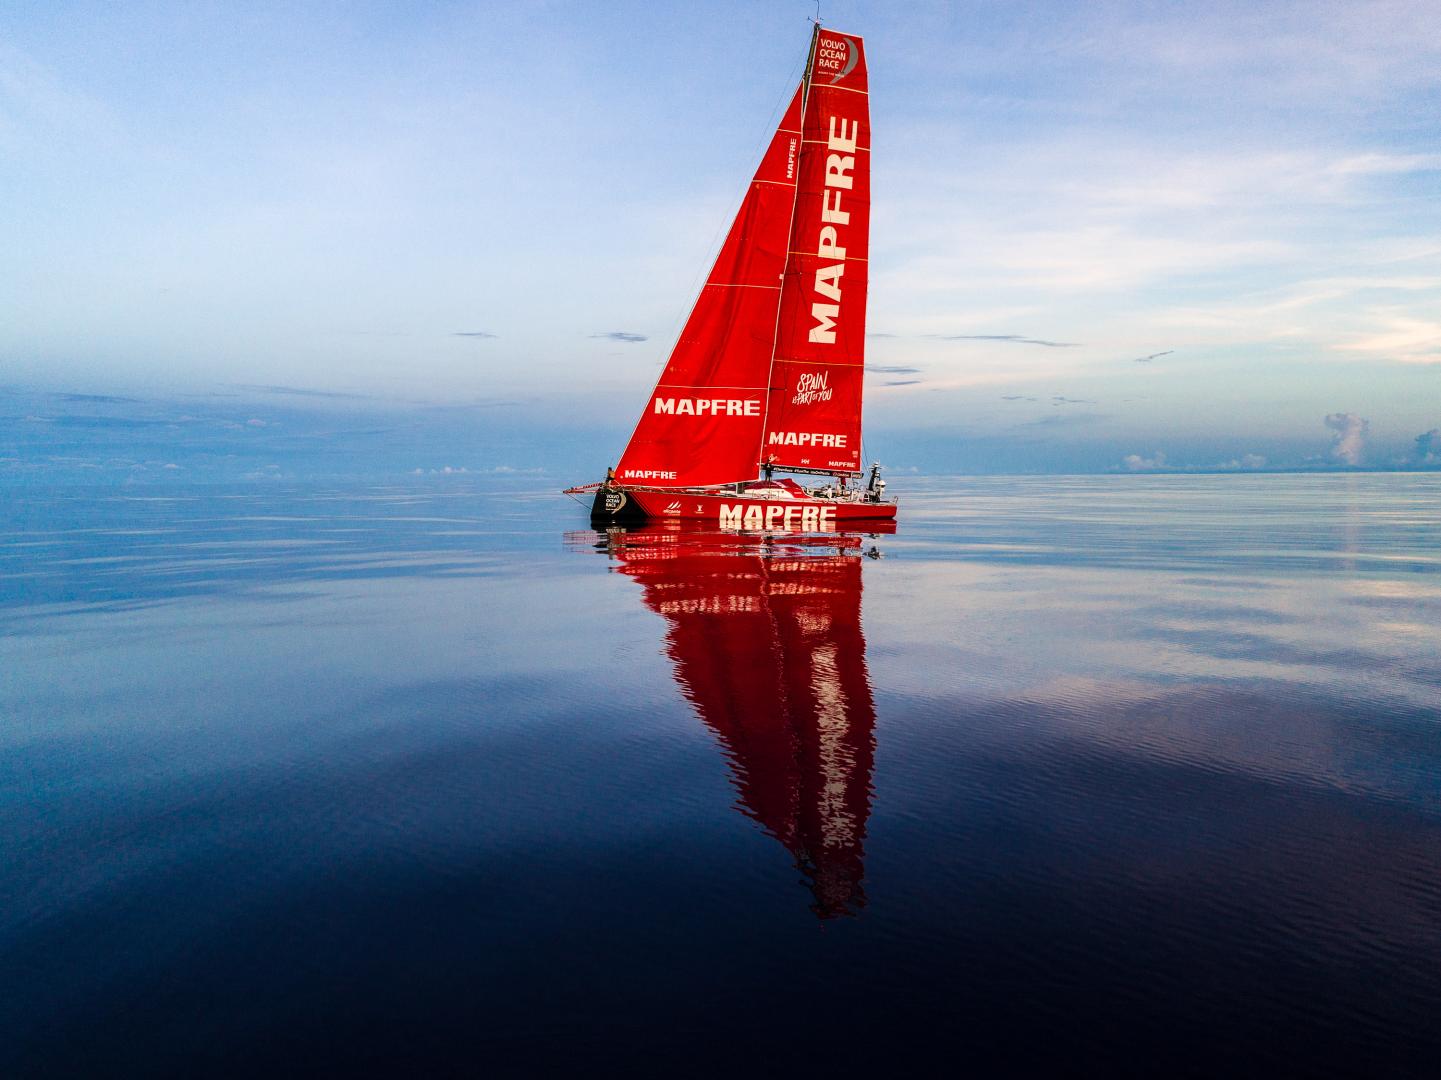 Leg 4, Melbourne to Hong Kong, day 08 on board MAPFRE